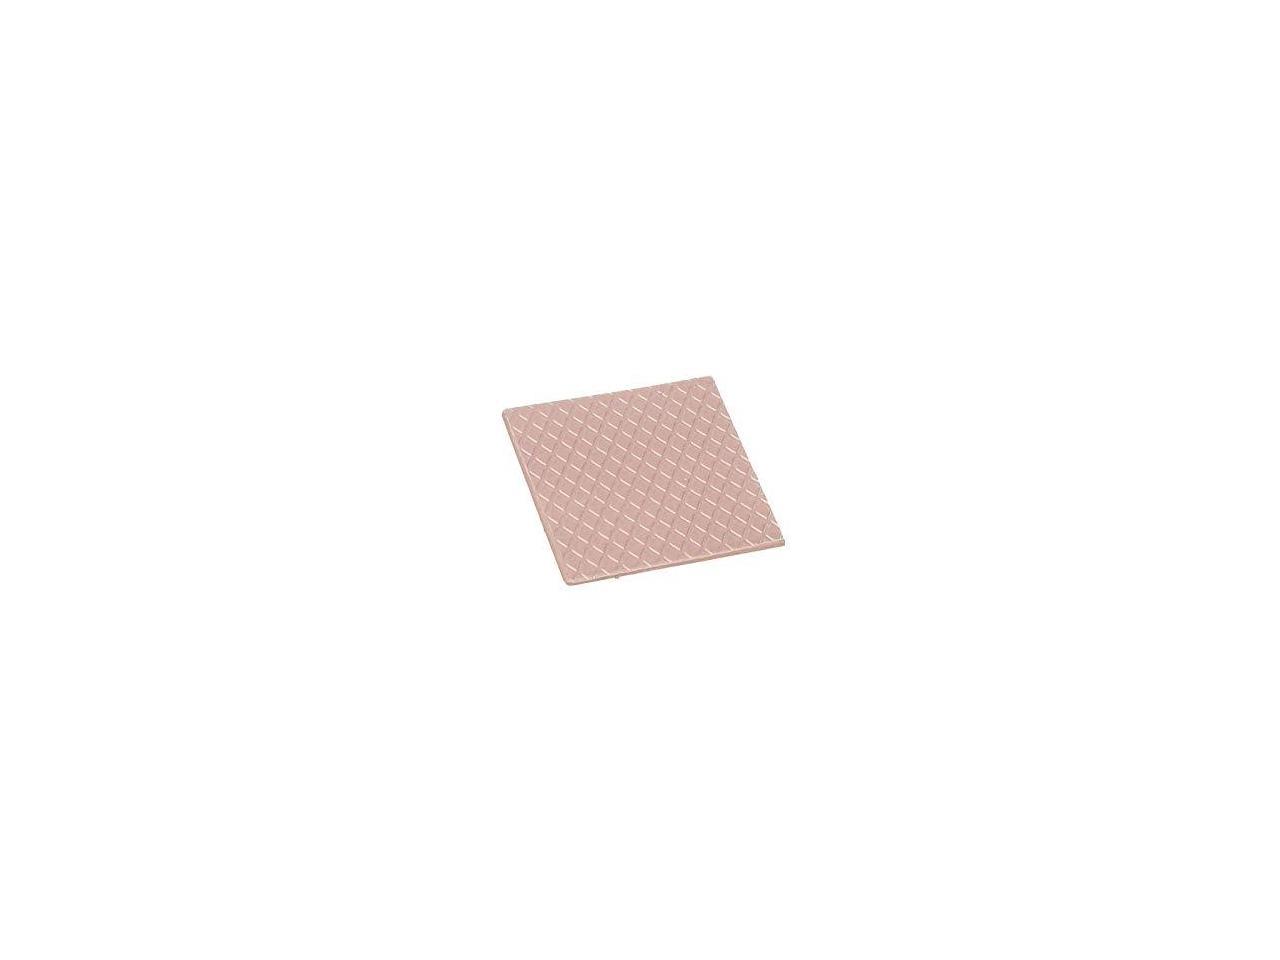 Thermal Grizzly Minus Pad 8 (Thermal Pad) 30x30x1.5mm